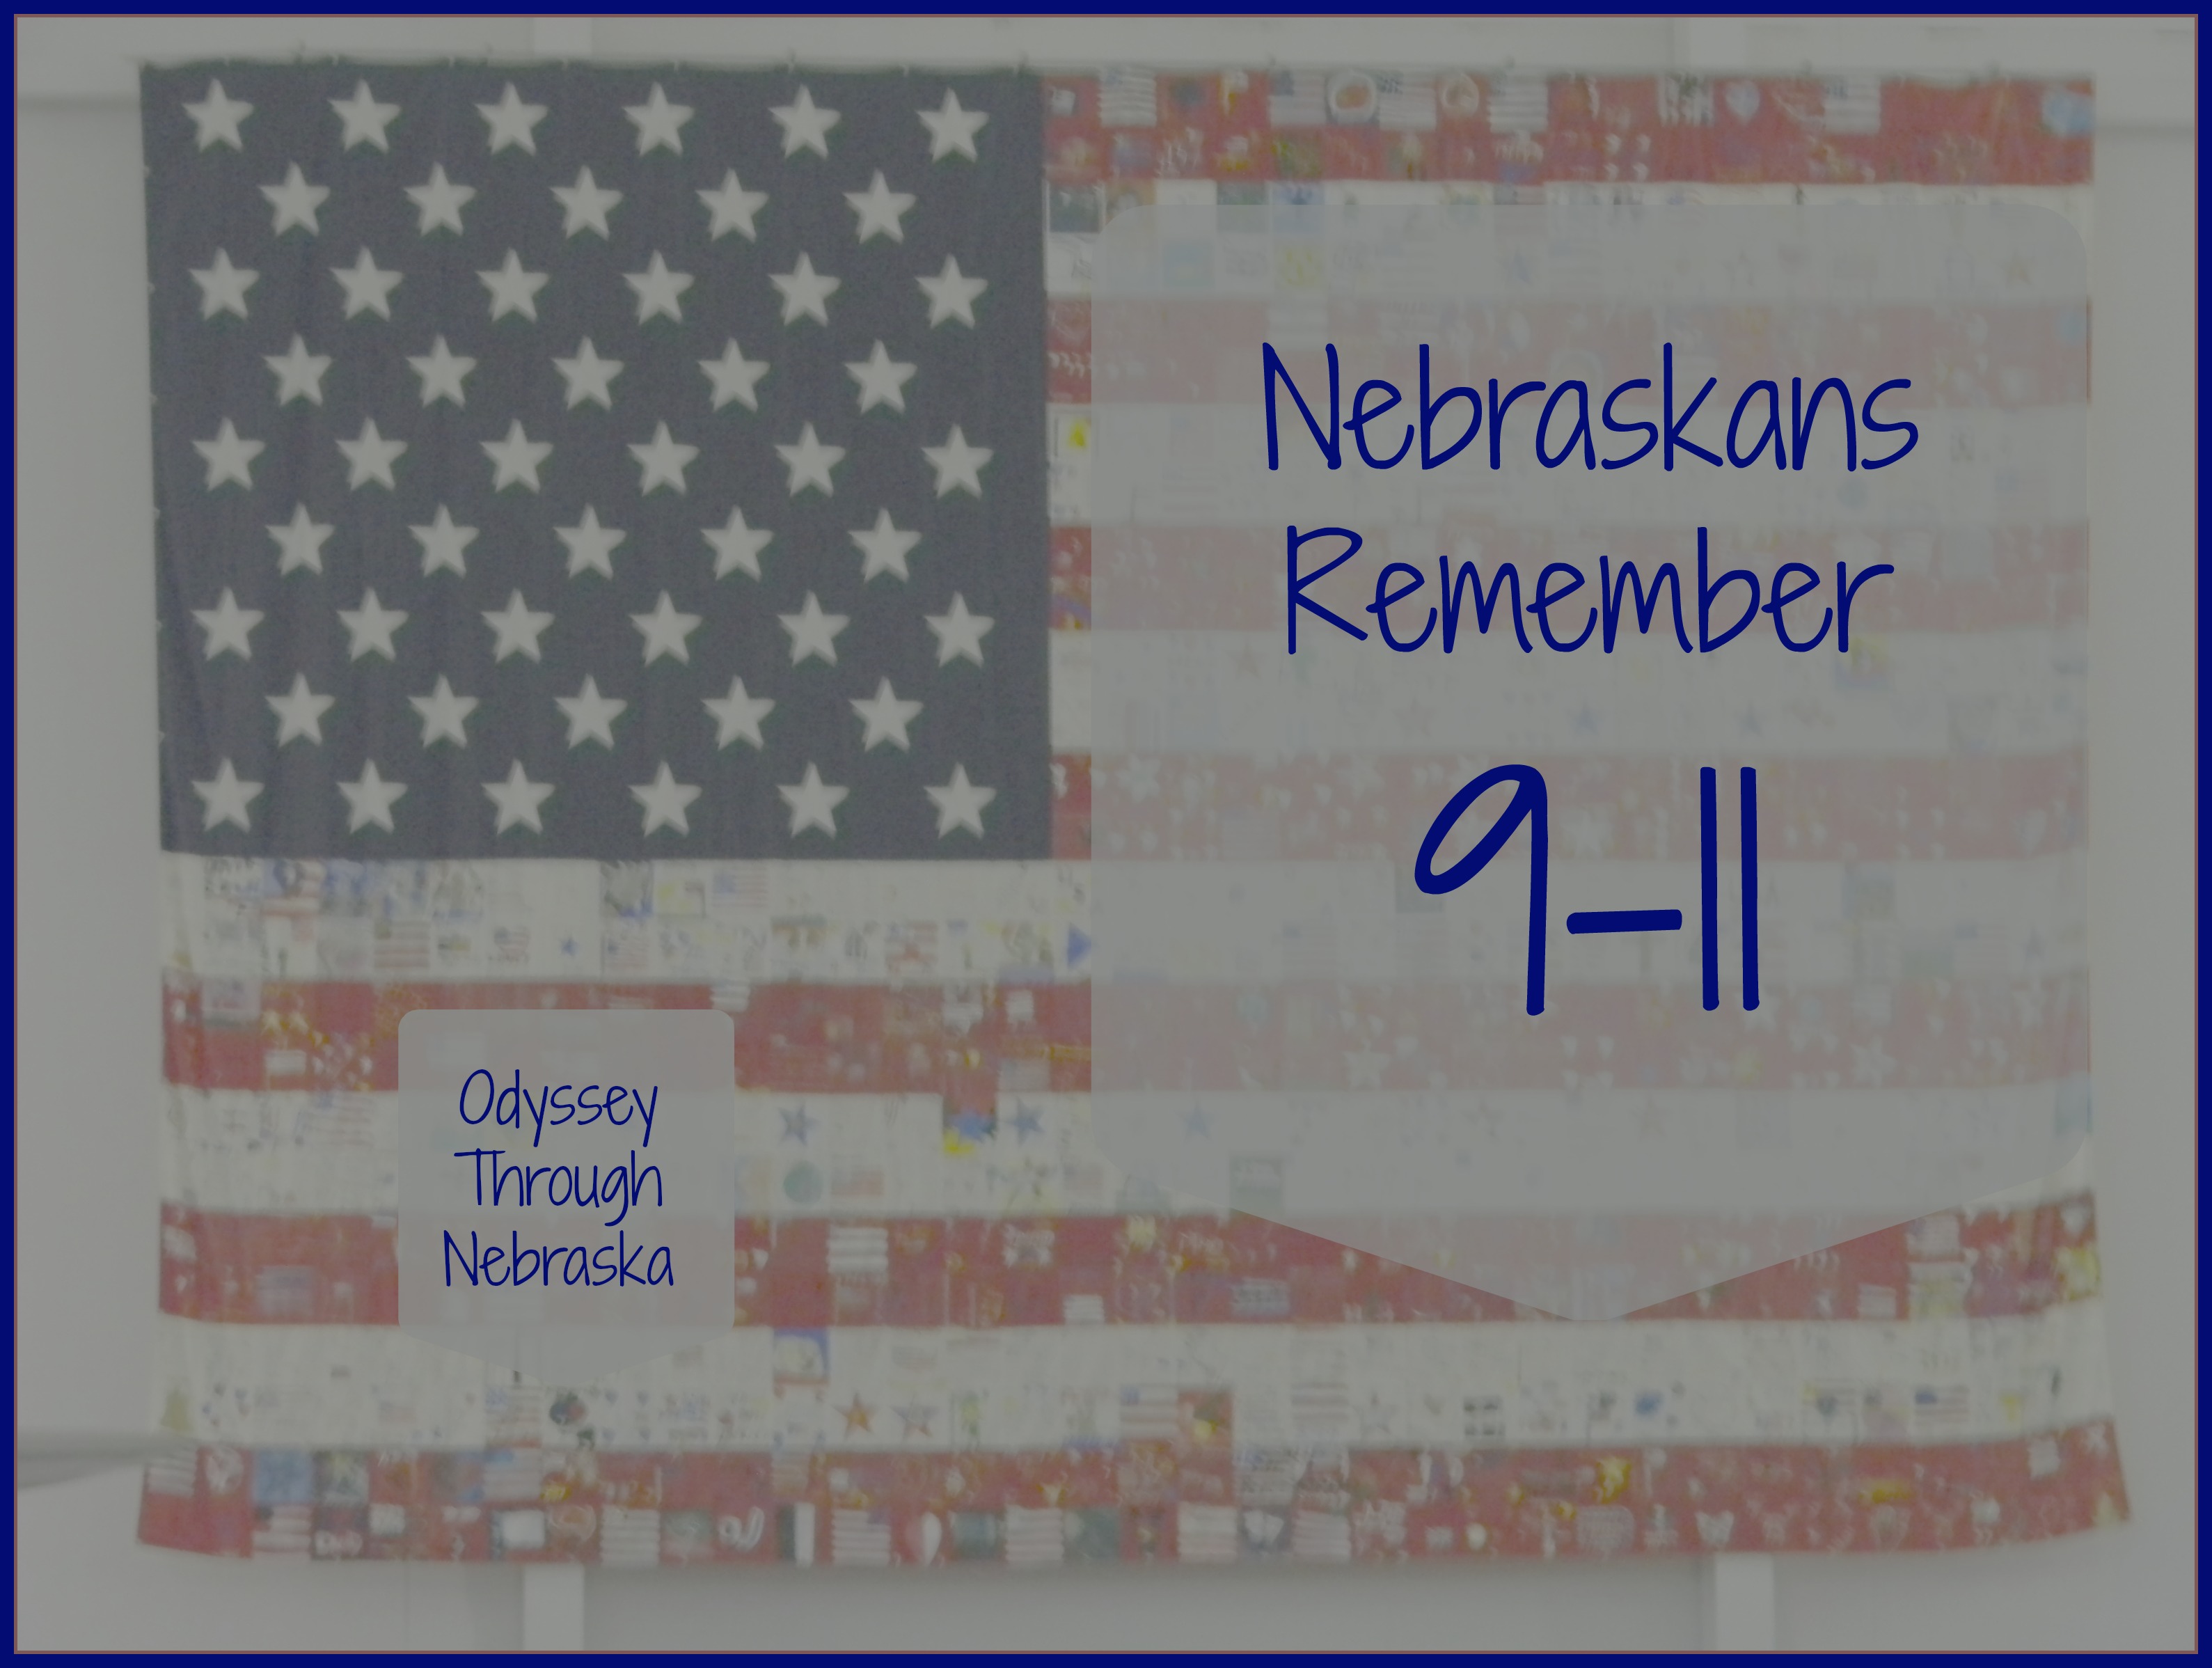 Every year across the state, Nebraskans commemorate 9-11 in various ways